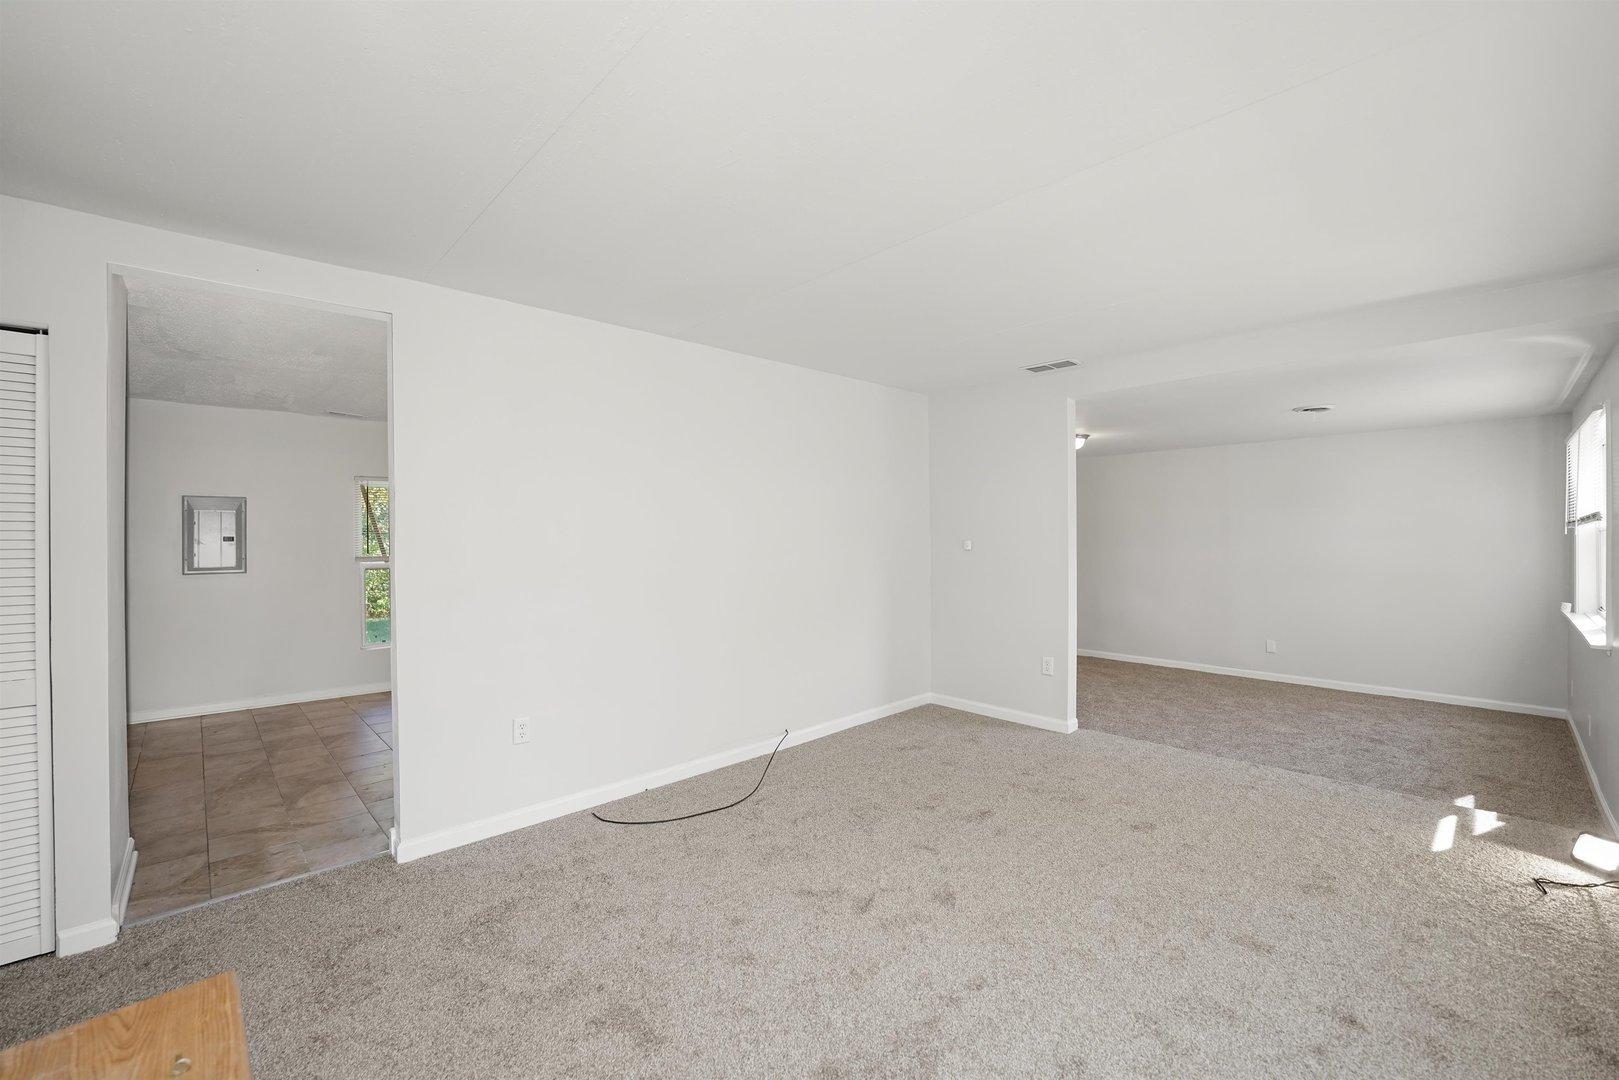 Before staging, the living room, kitchen, and dining room in Richton Park property, showing the space's initial condition with white painted walls, carpeted living and dining room, and tiled kitchen.